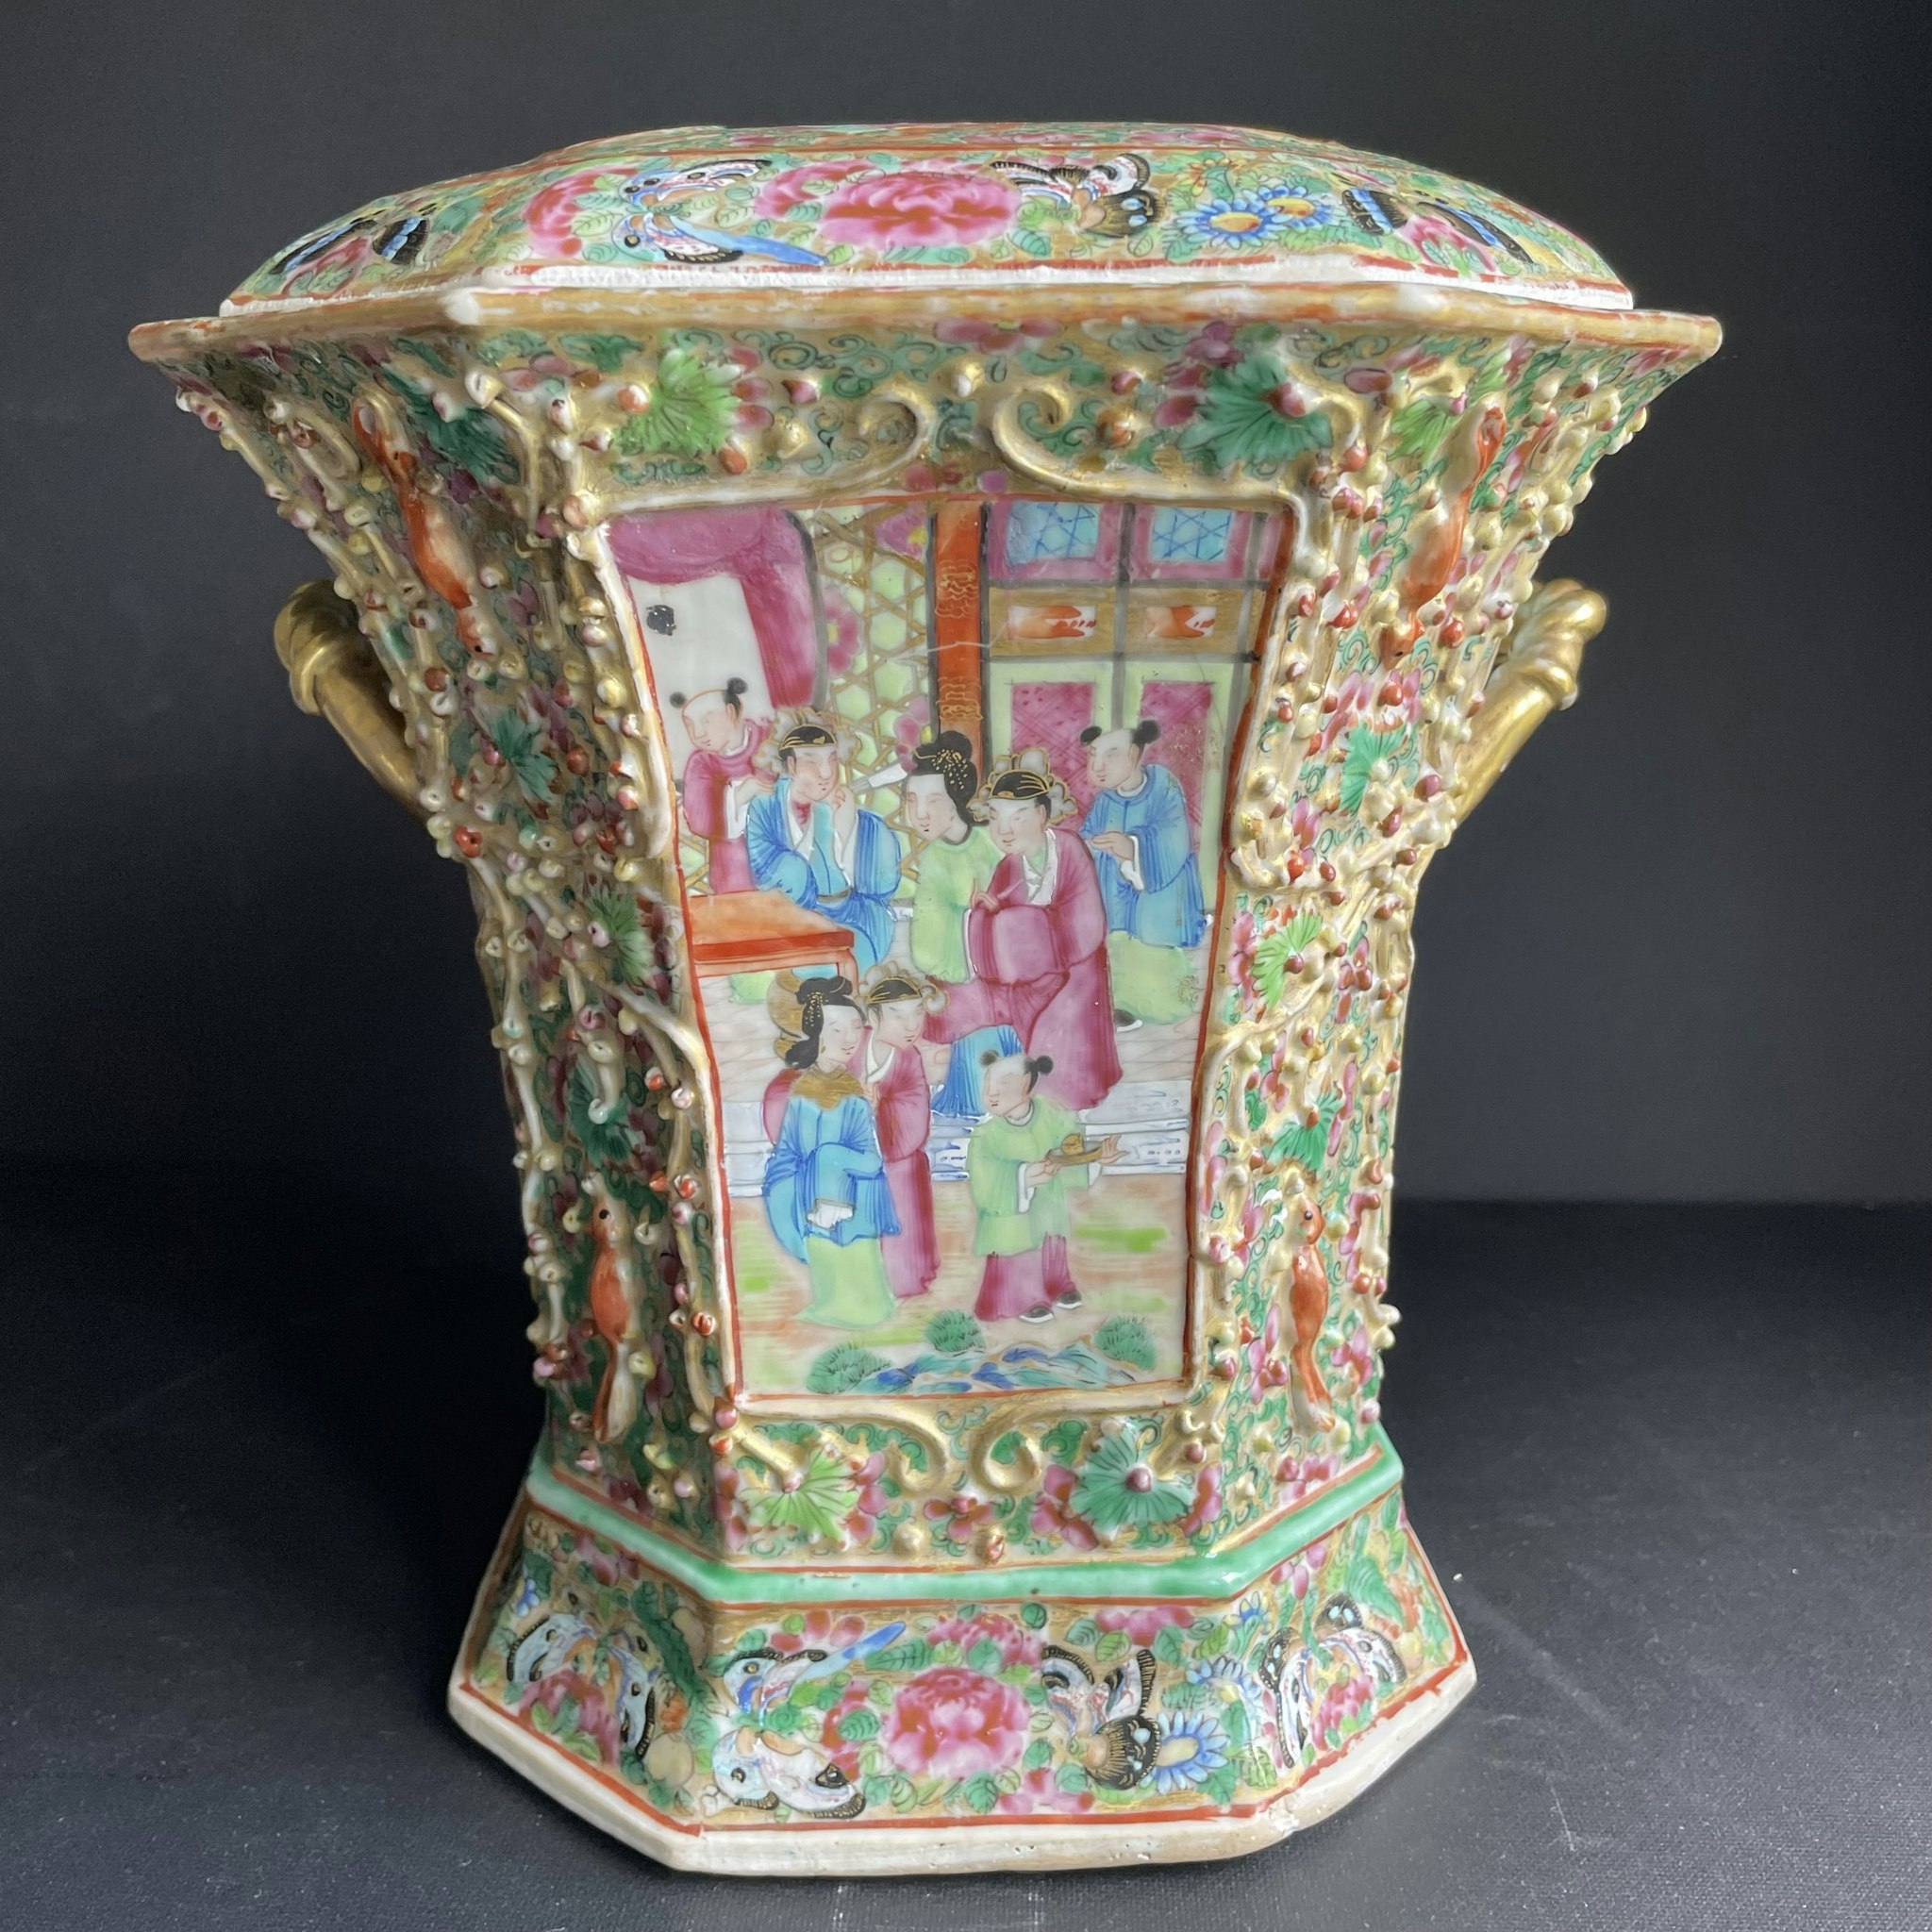 Chinese Famille Rose Bough Pot / Tulip vase, 19th c, Late Qing Dynasty #1087